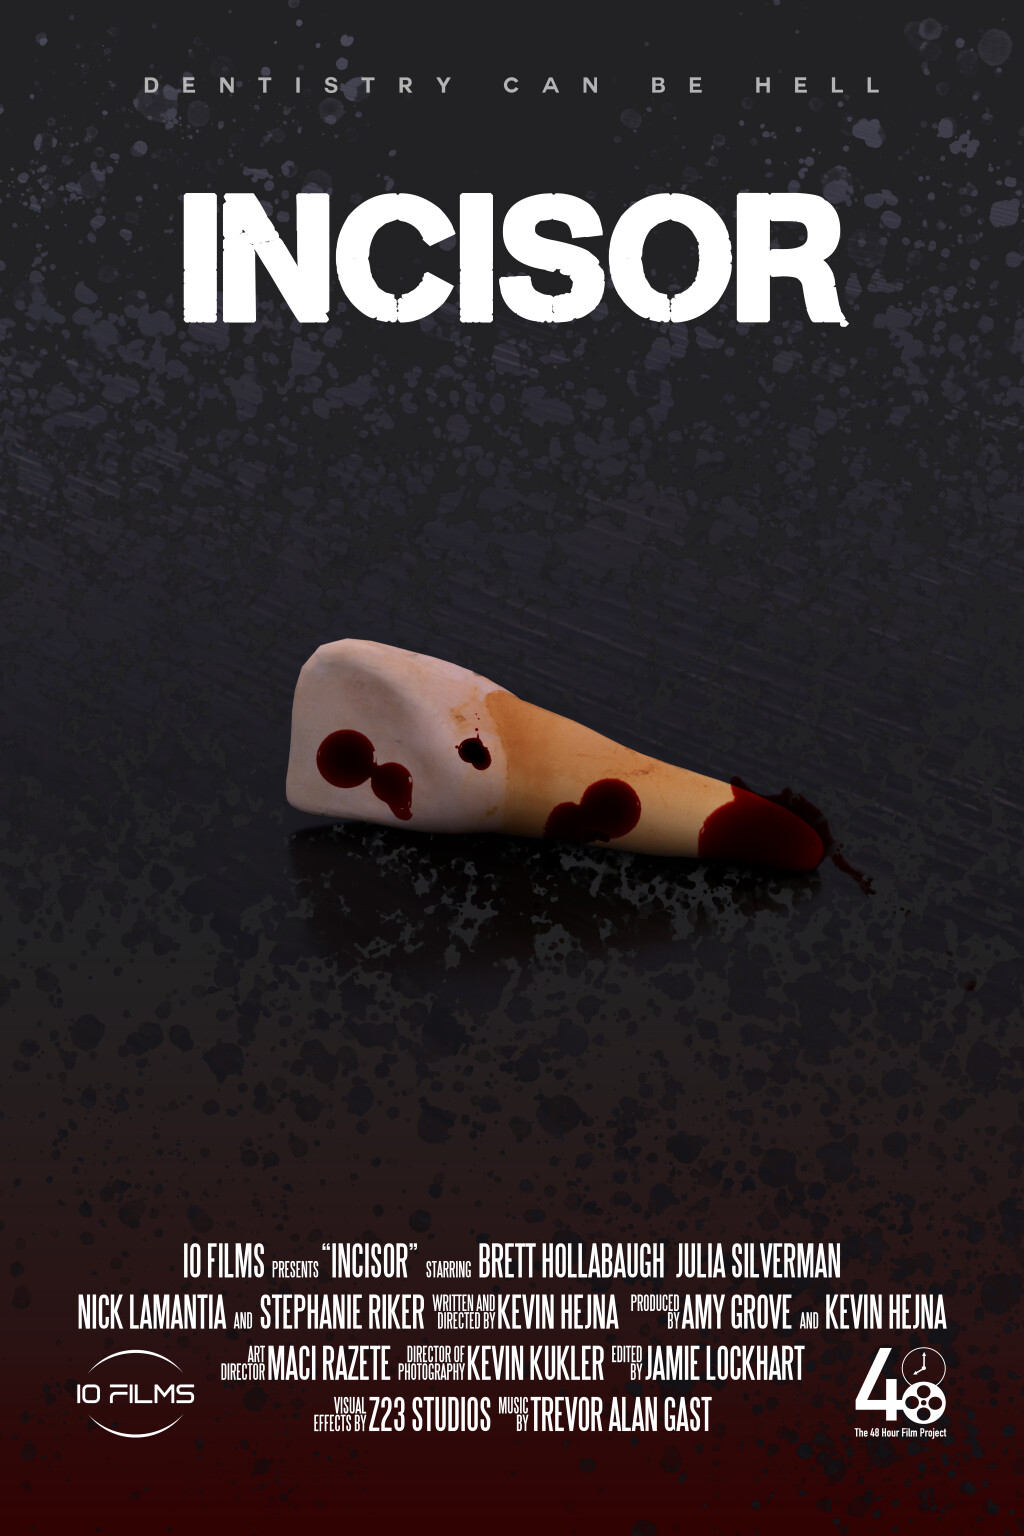 Filmposter for Incisor